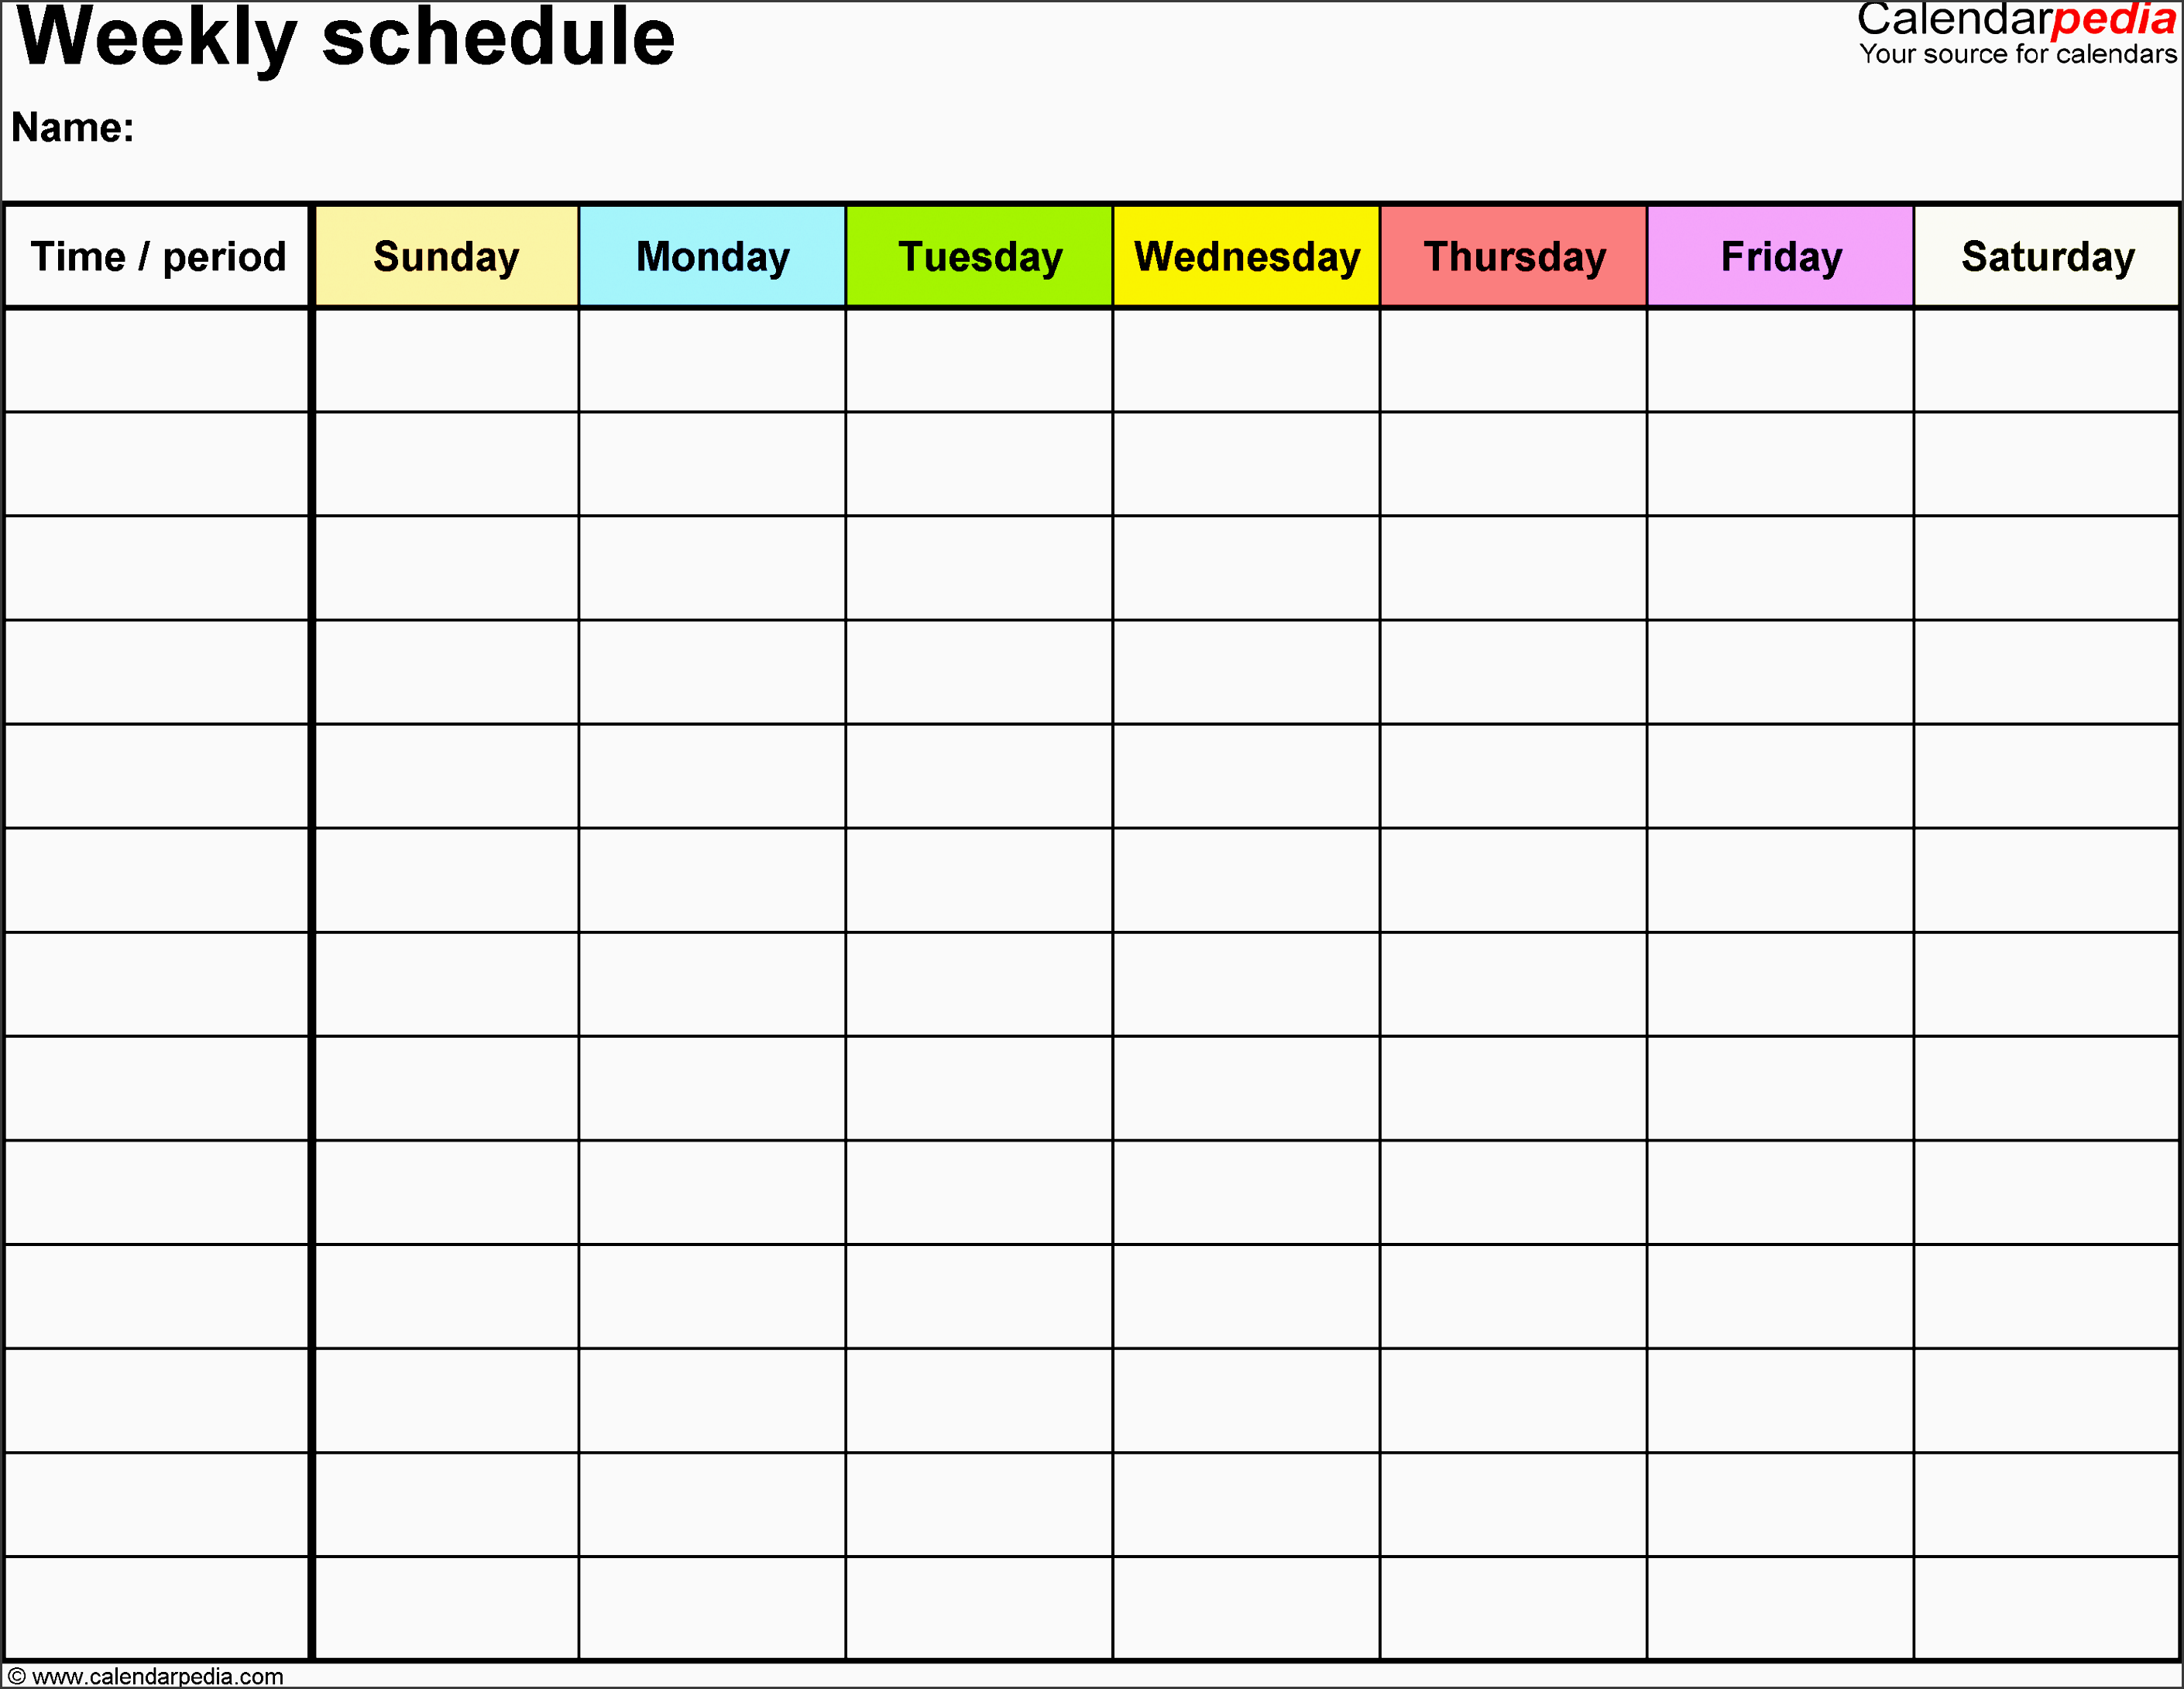 weekly schedule template for pdf version 13 landscape 1 page sunday to saturday